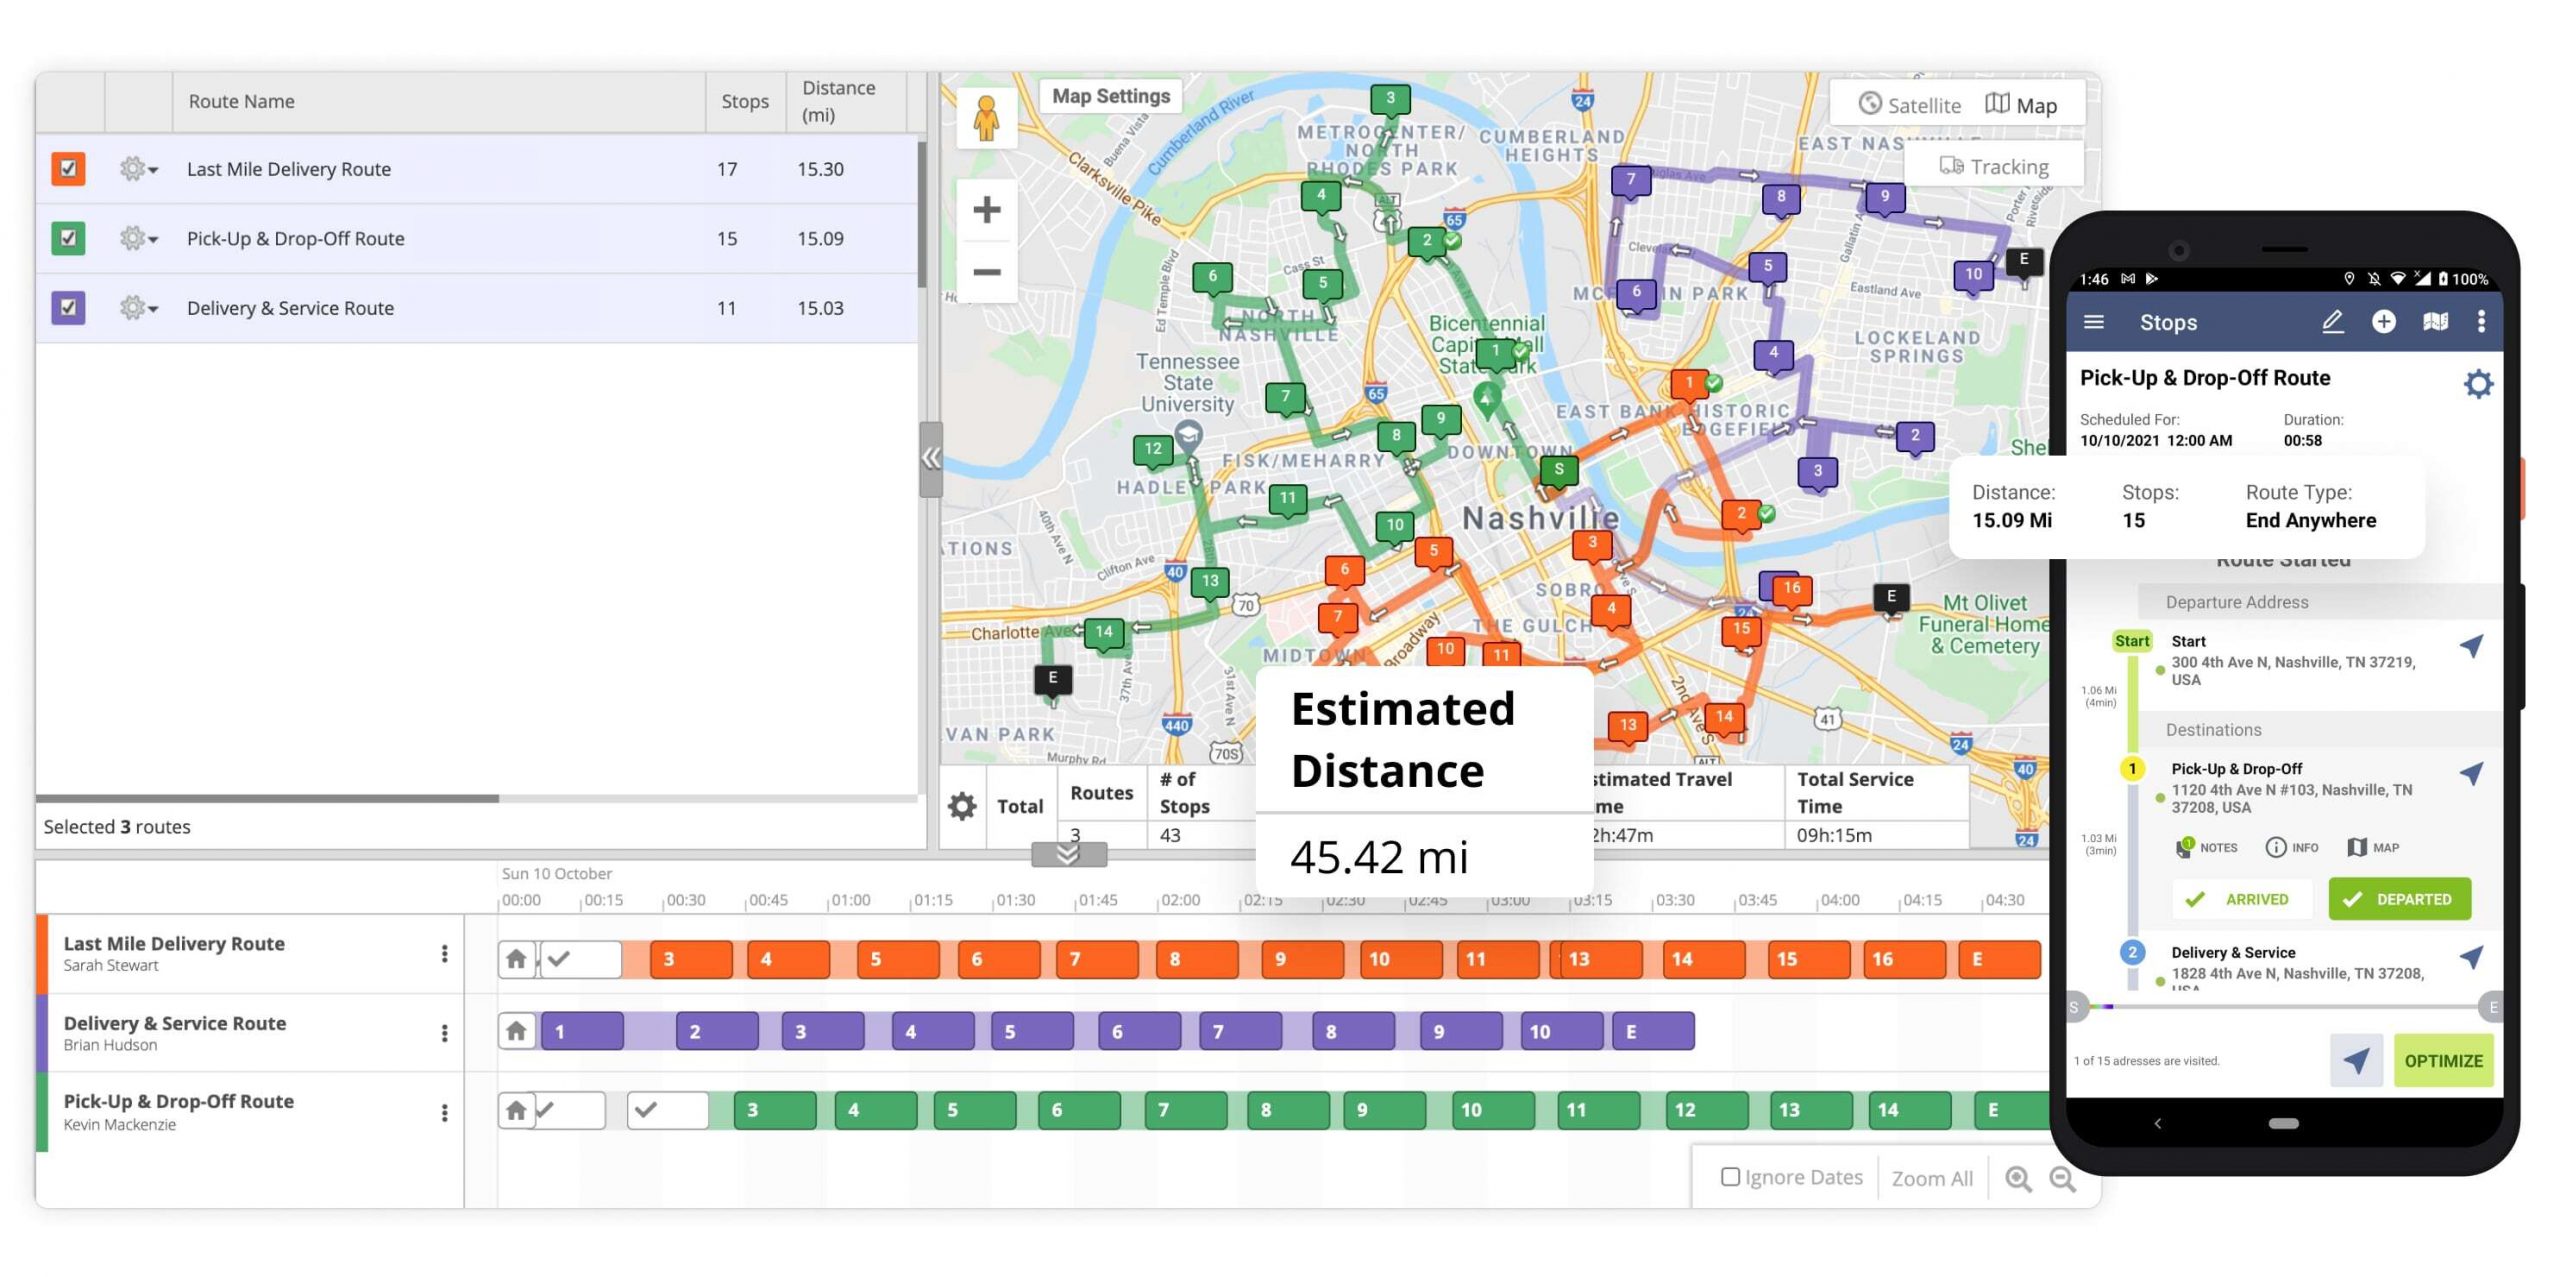 Route4Me's tracking tools - GPS Distance displayed as Estimates Distance in the route summary table 